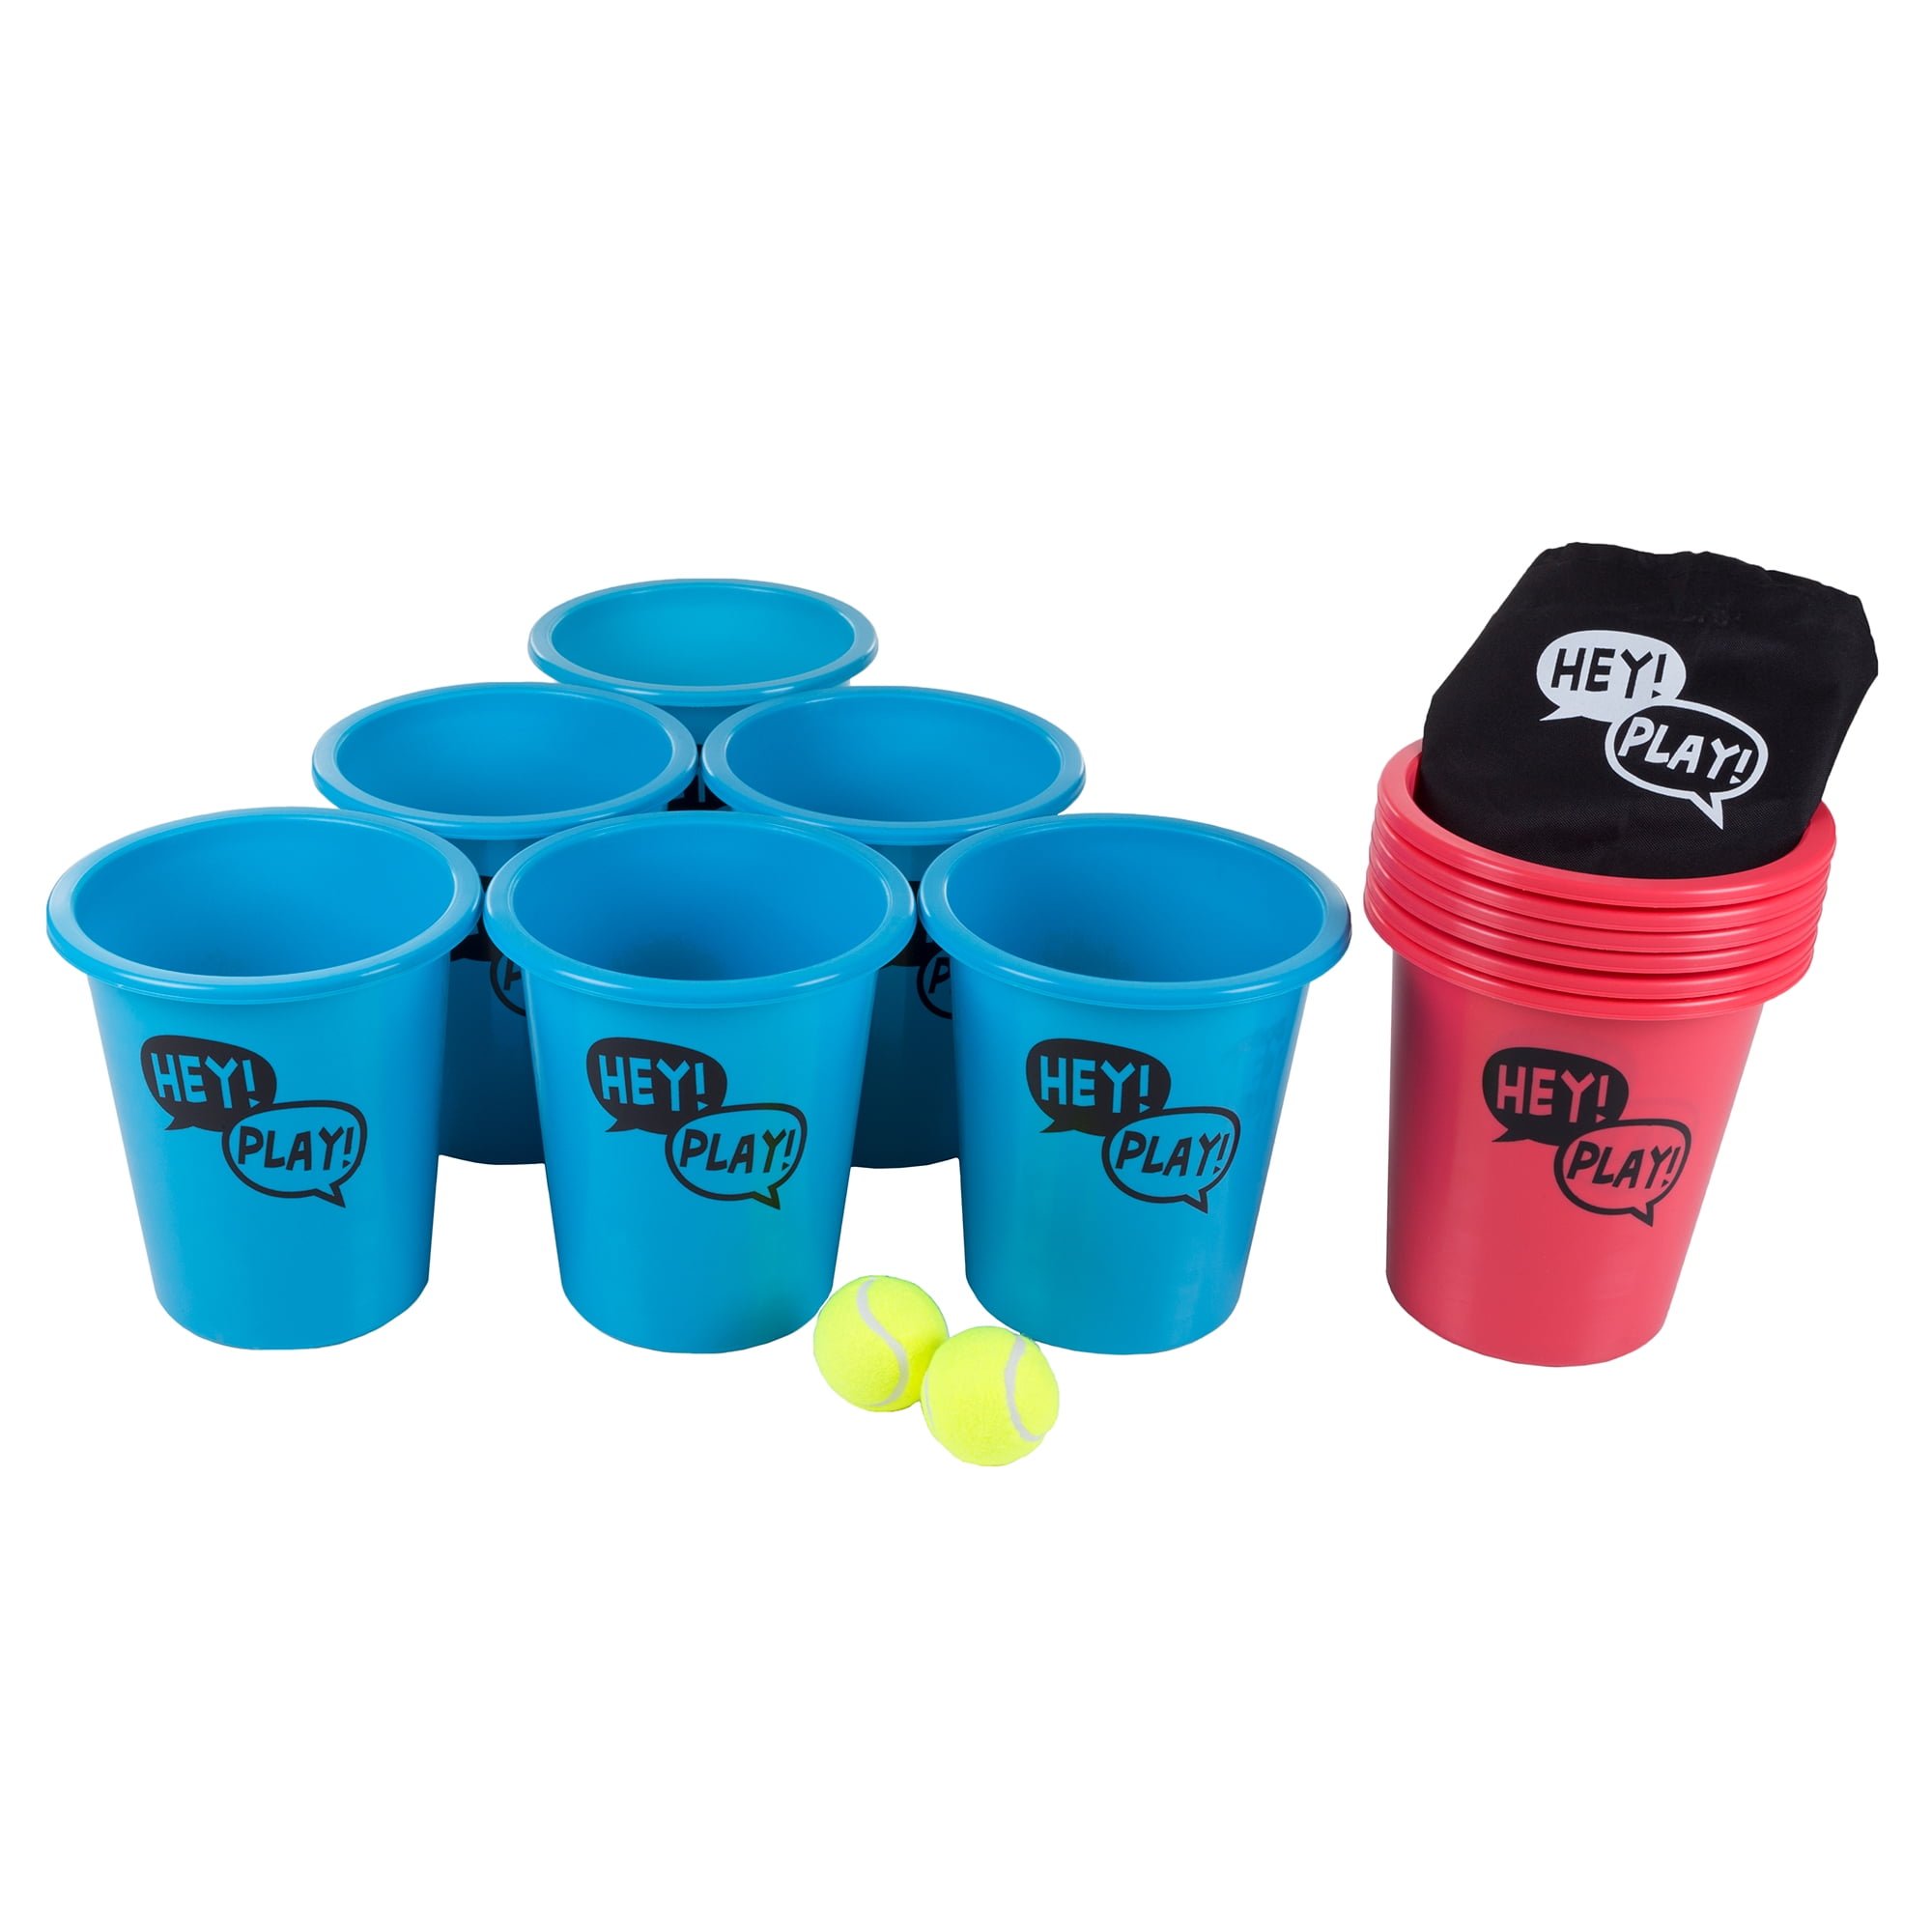 Battle Pong Adult Boys Girls Drinking Party Game Throwing Ball Cup Fun Set Gift 